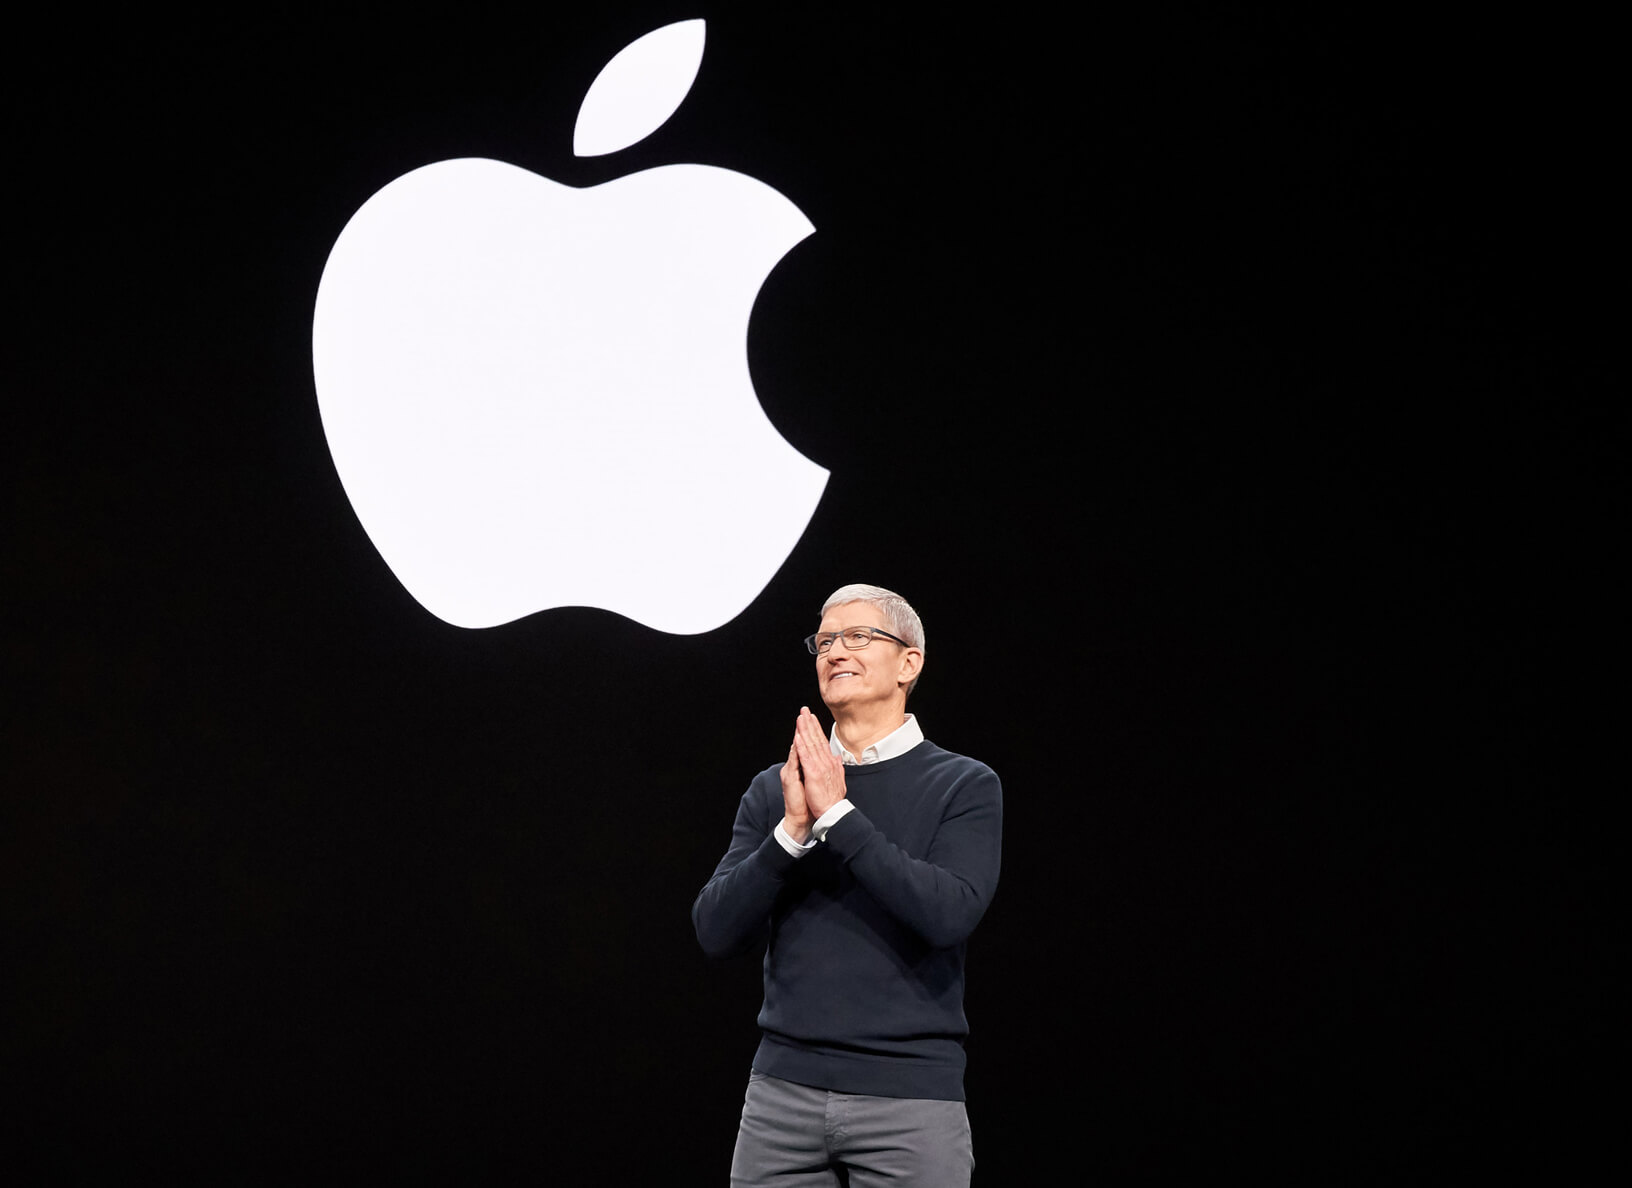 Tim Cook says Apple wants to continue making the Mac Pro in the U.S.